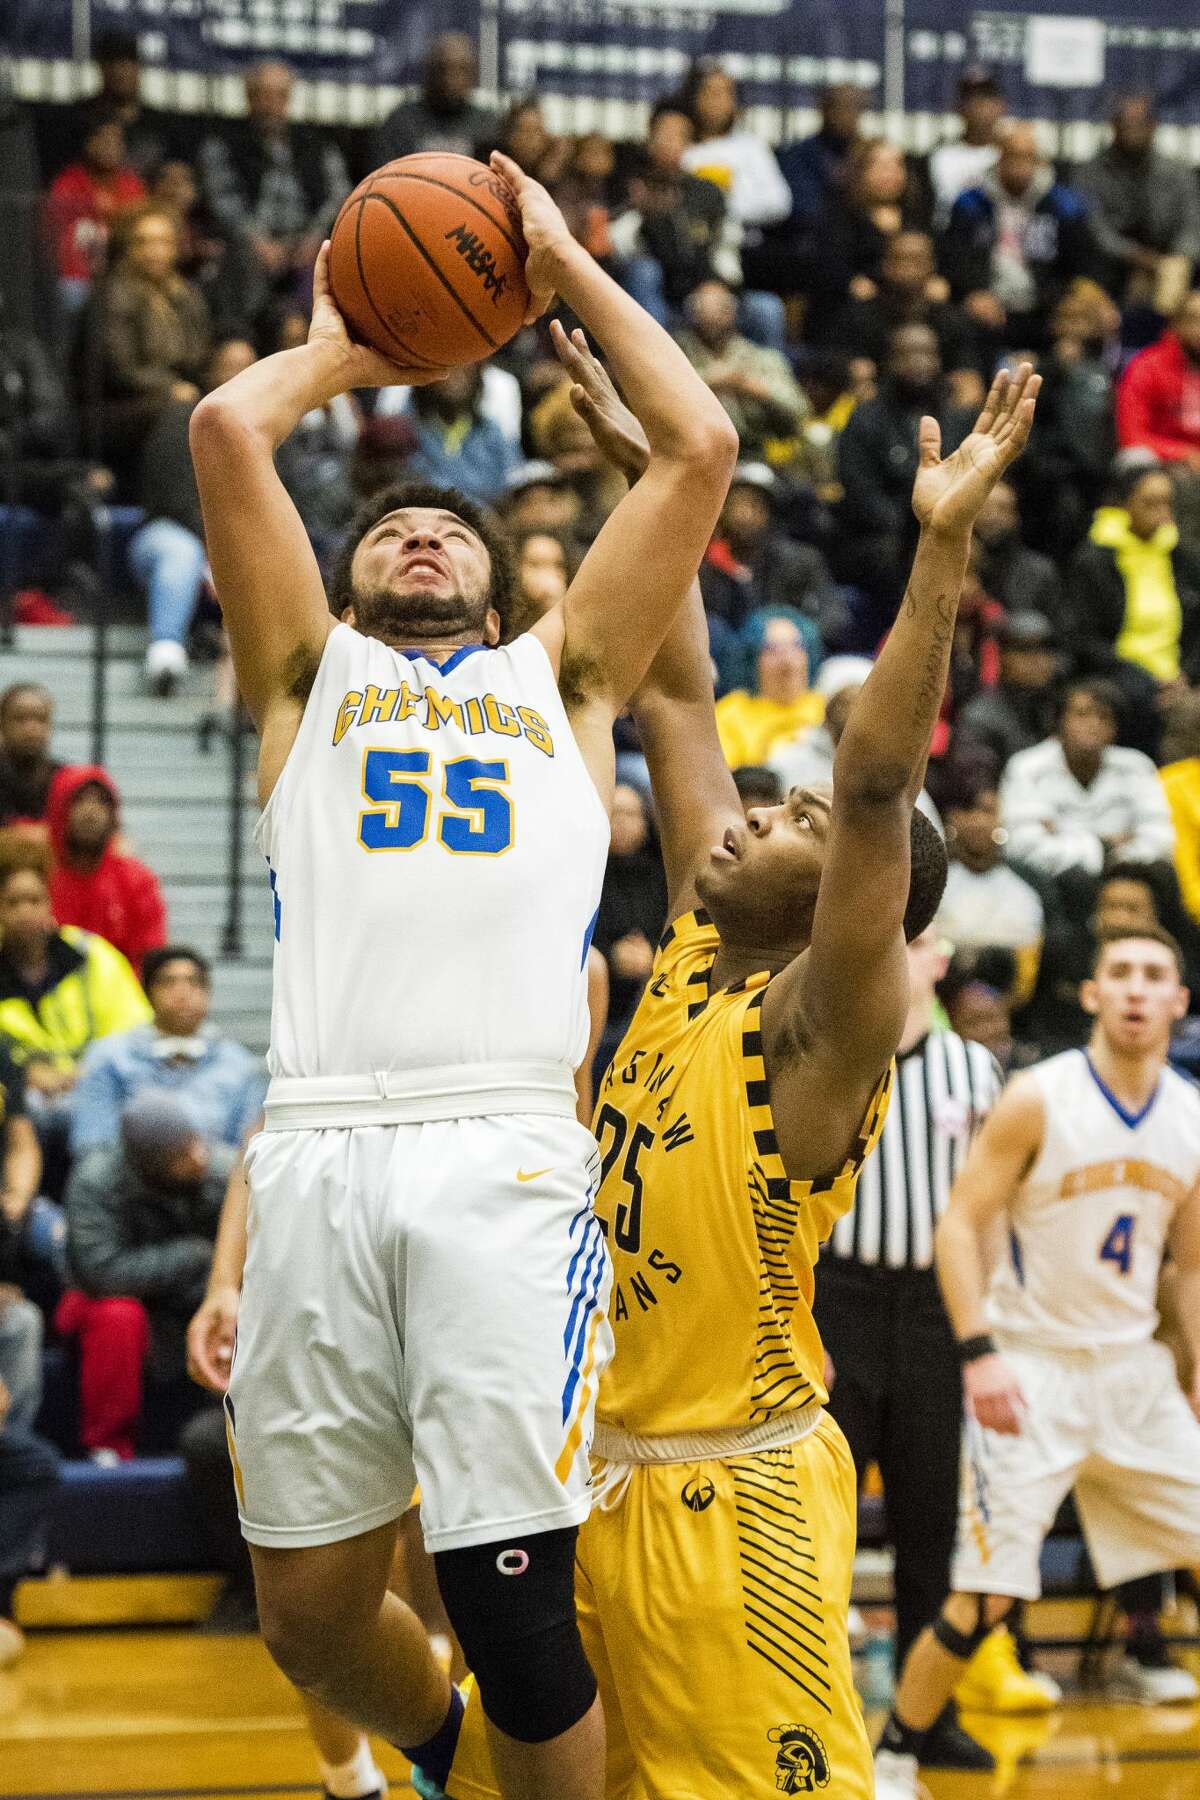 Midland senior Isaiah Bridges takes a shot during the Division 1 regional final on Friday in Saginaw. (Danielle McGrew Tenbusch/for the Daily News)